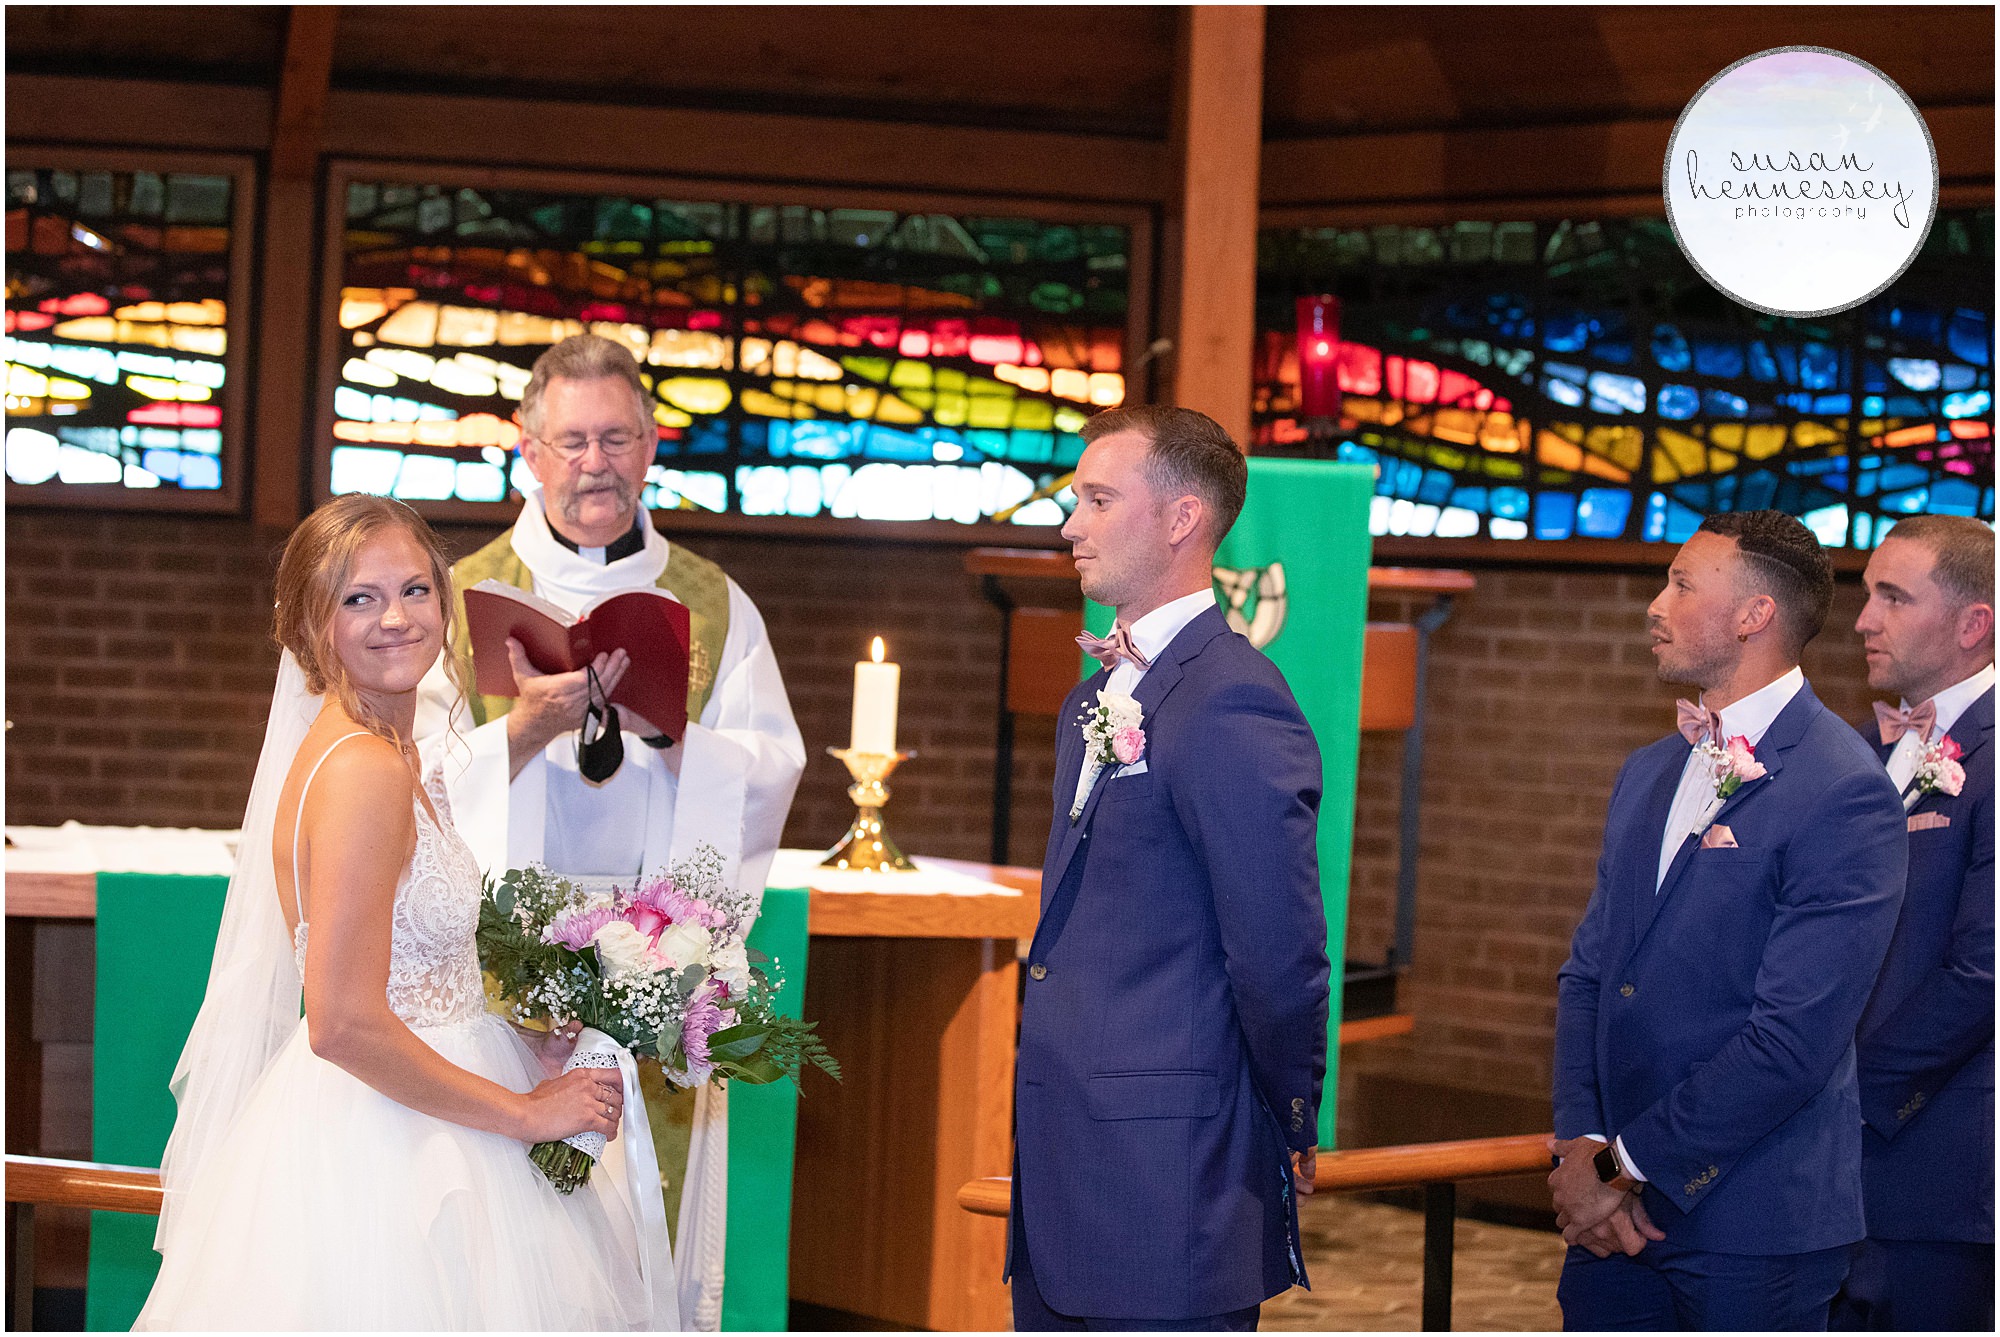 microwedding ceremony in cherry hill